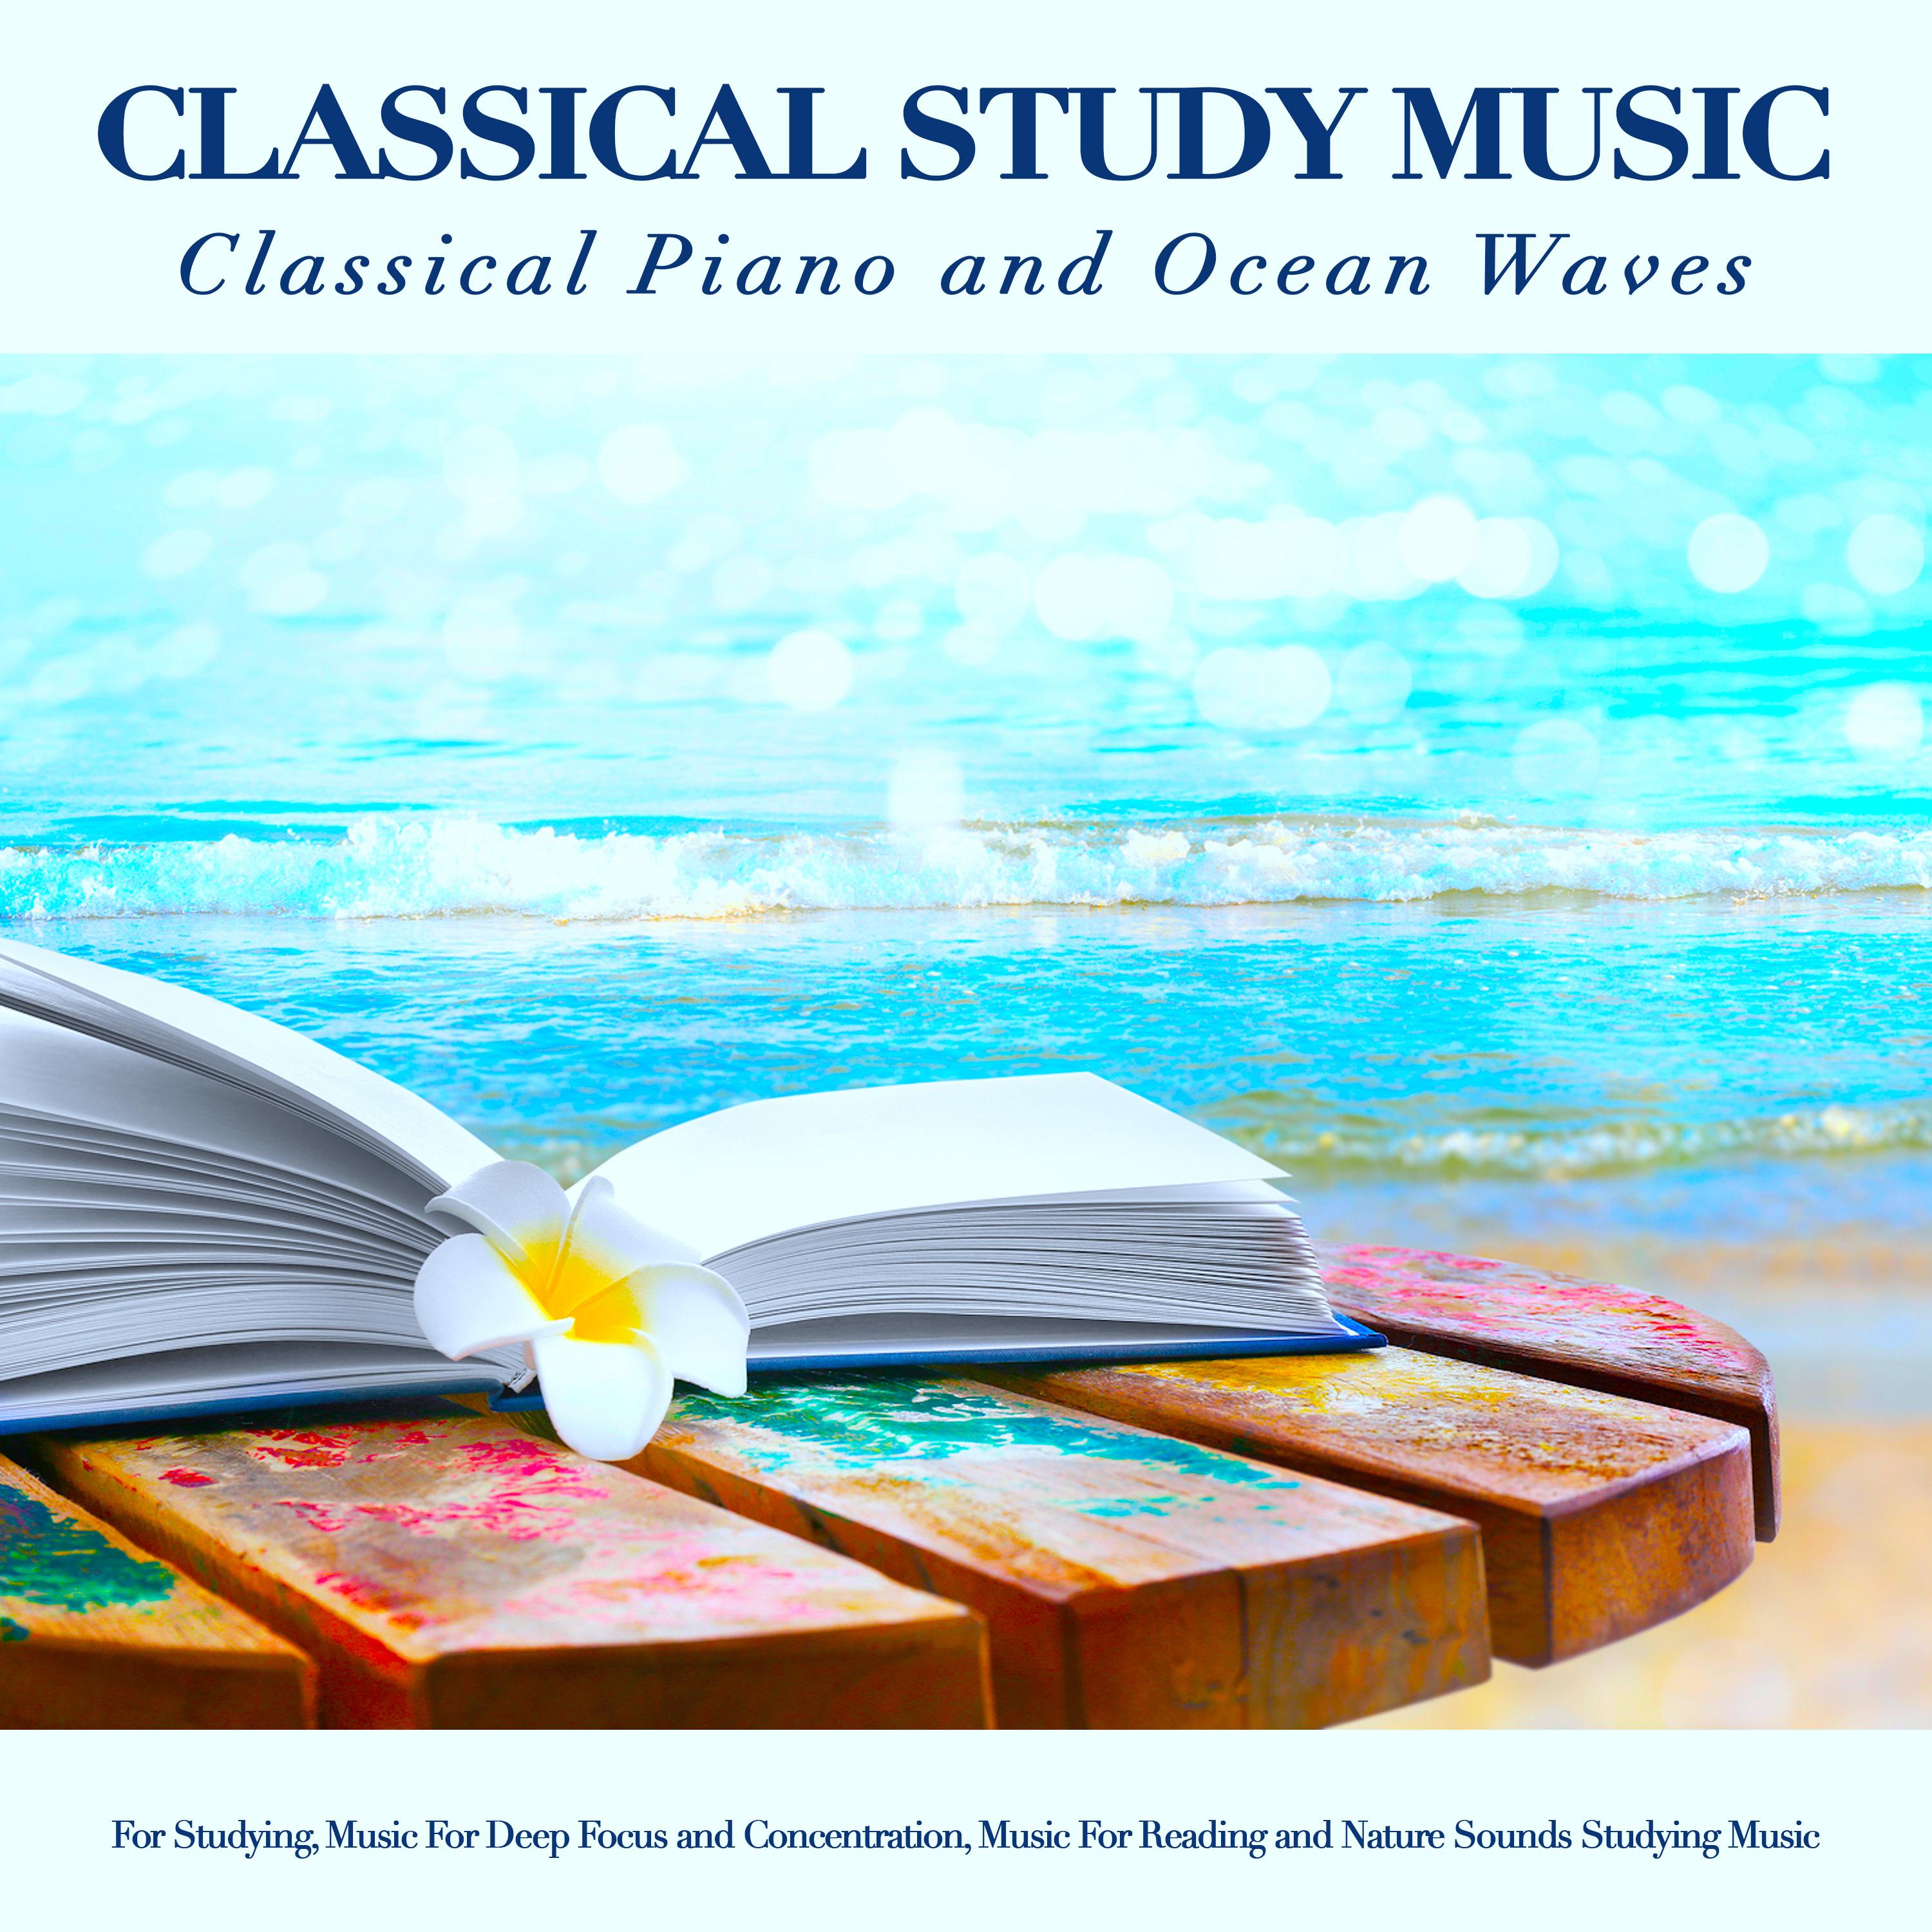 Ballade in D major - Brahms - Classical Study Music - Ocean Waves Sounds - Classical Piano for Studying